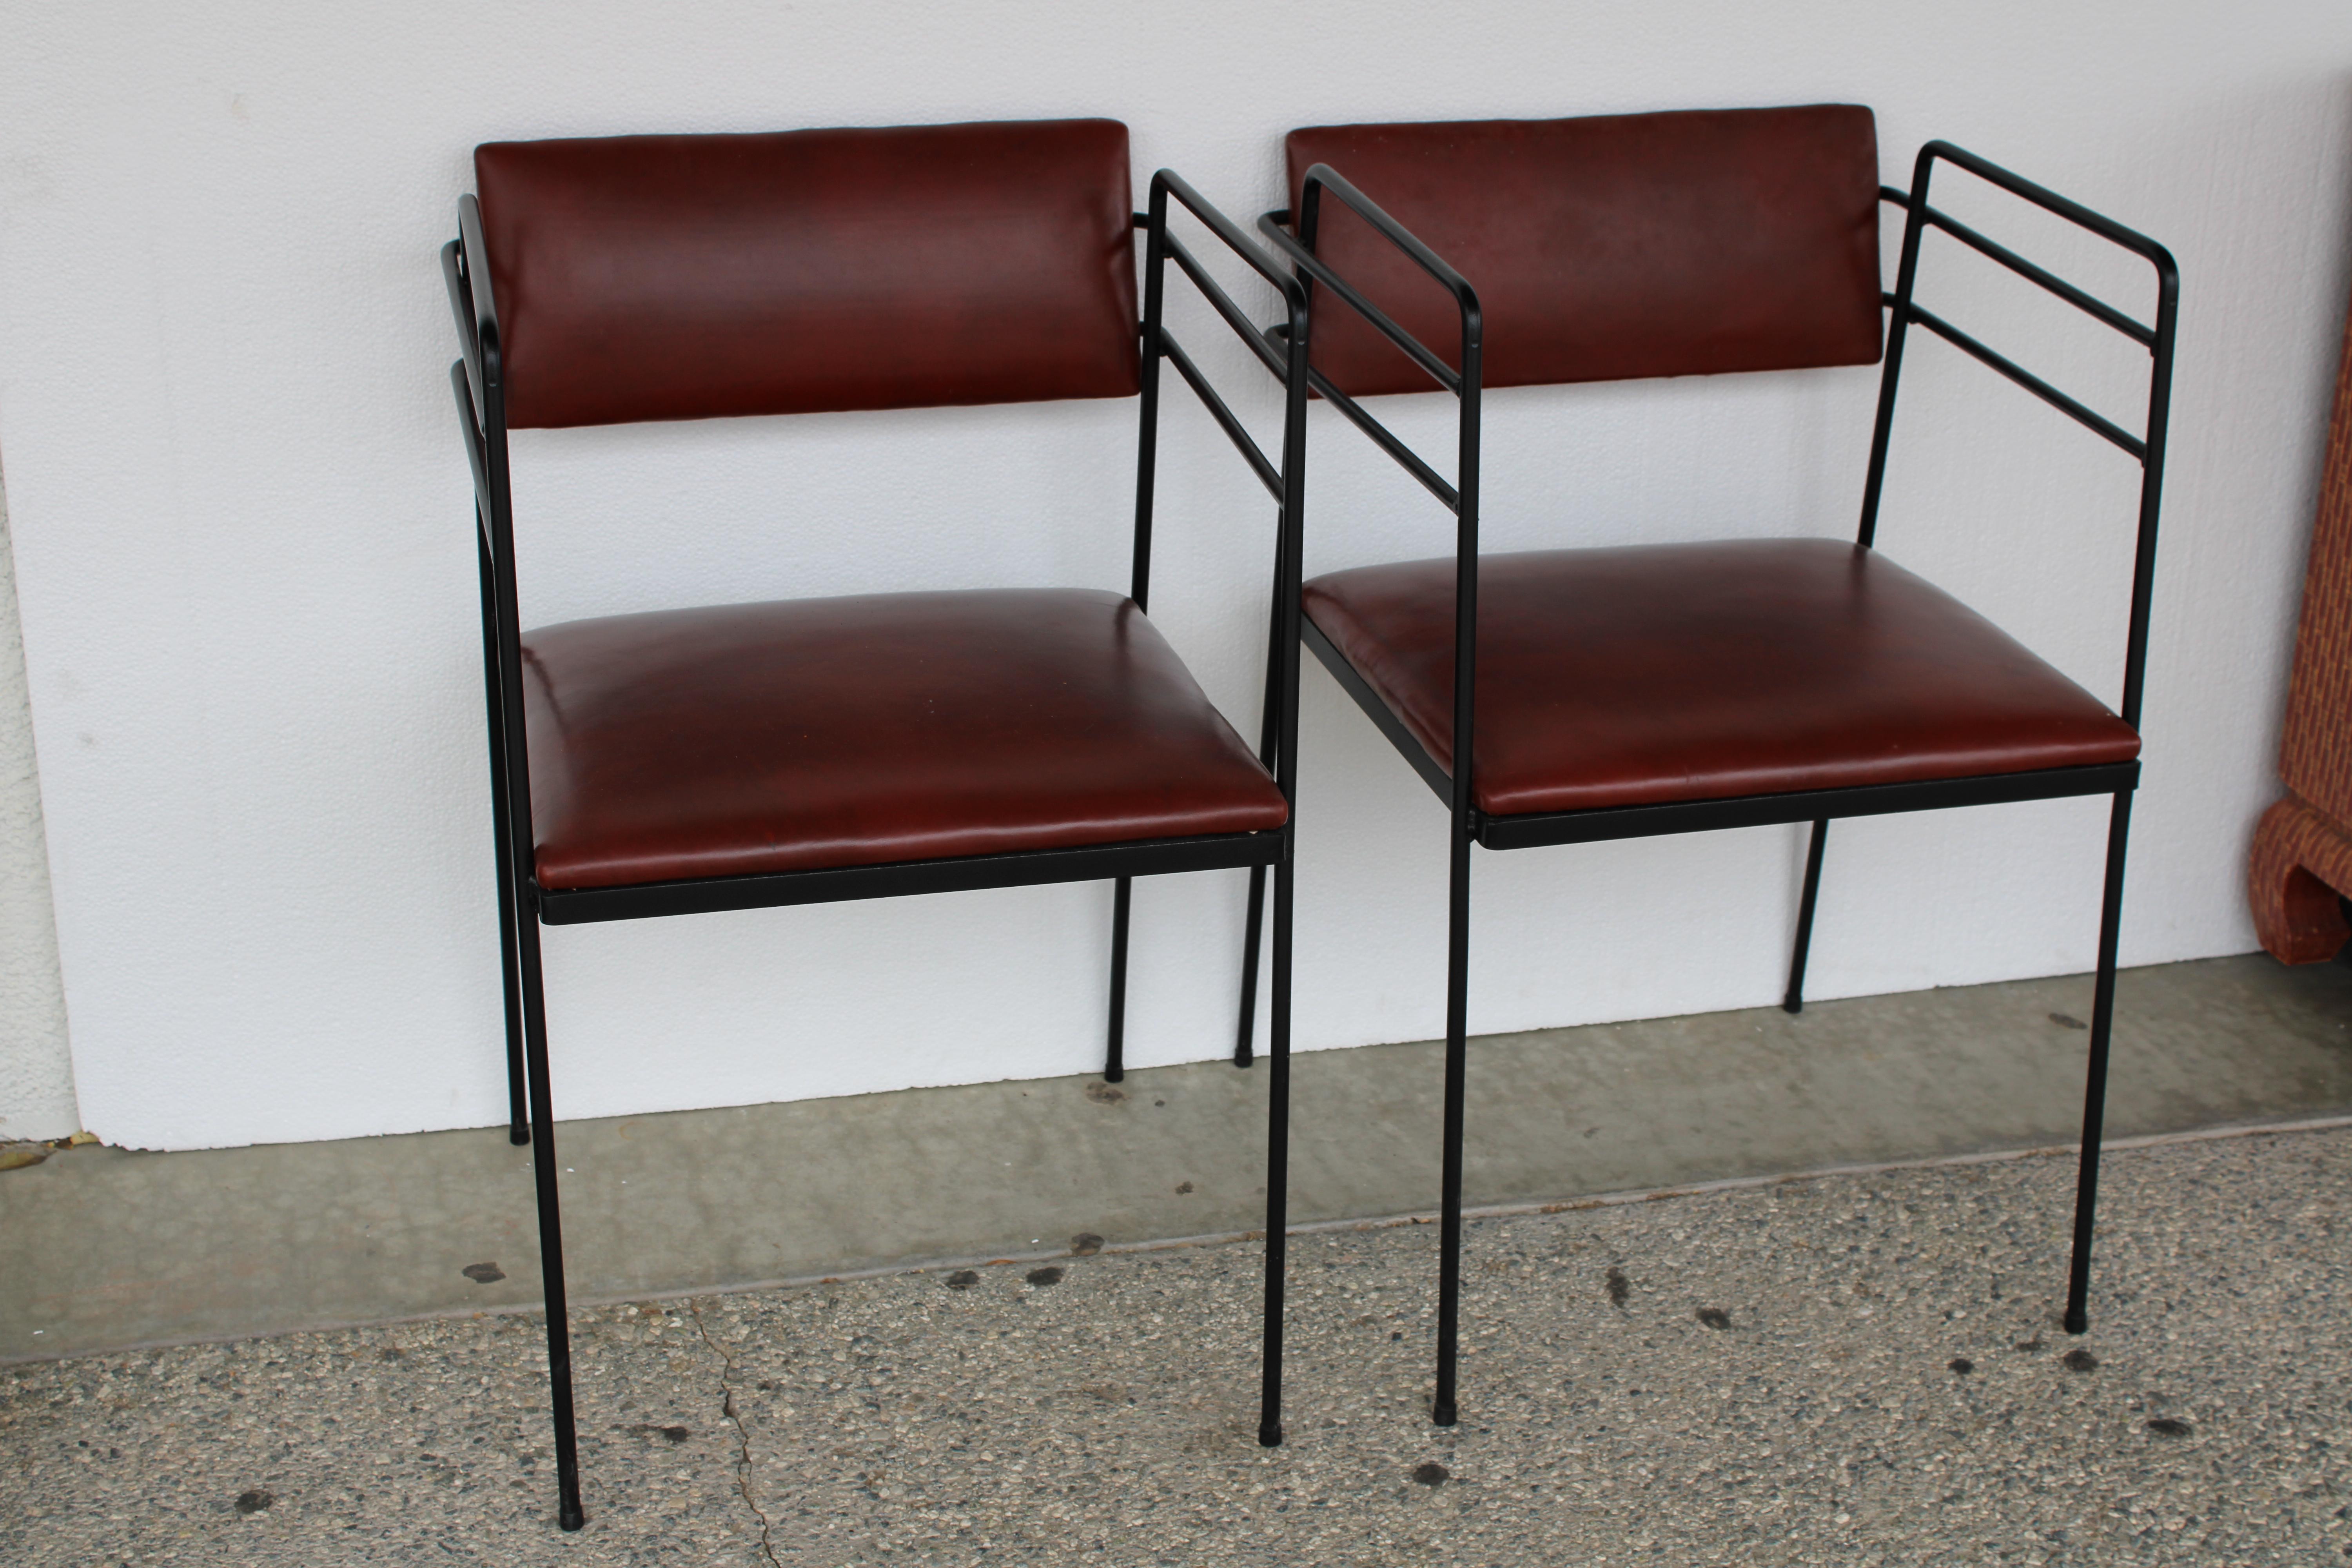 Pair of steel mid century patio chairs with original naugahyde cushions.  We had the frames professionally sand blasted and powder coated black (which was the original color).  Each chair measures 19.5